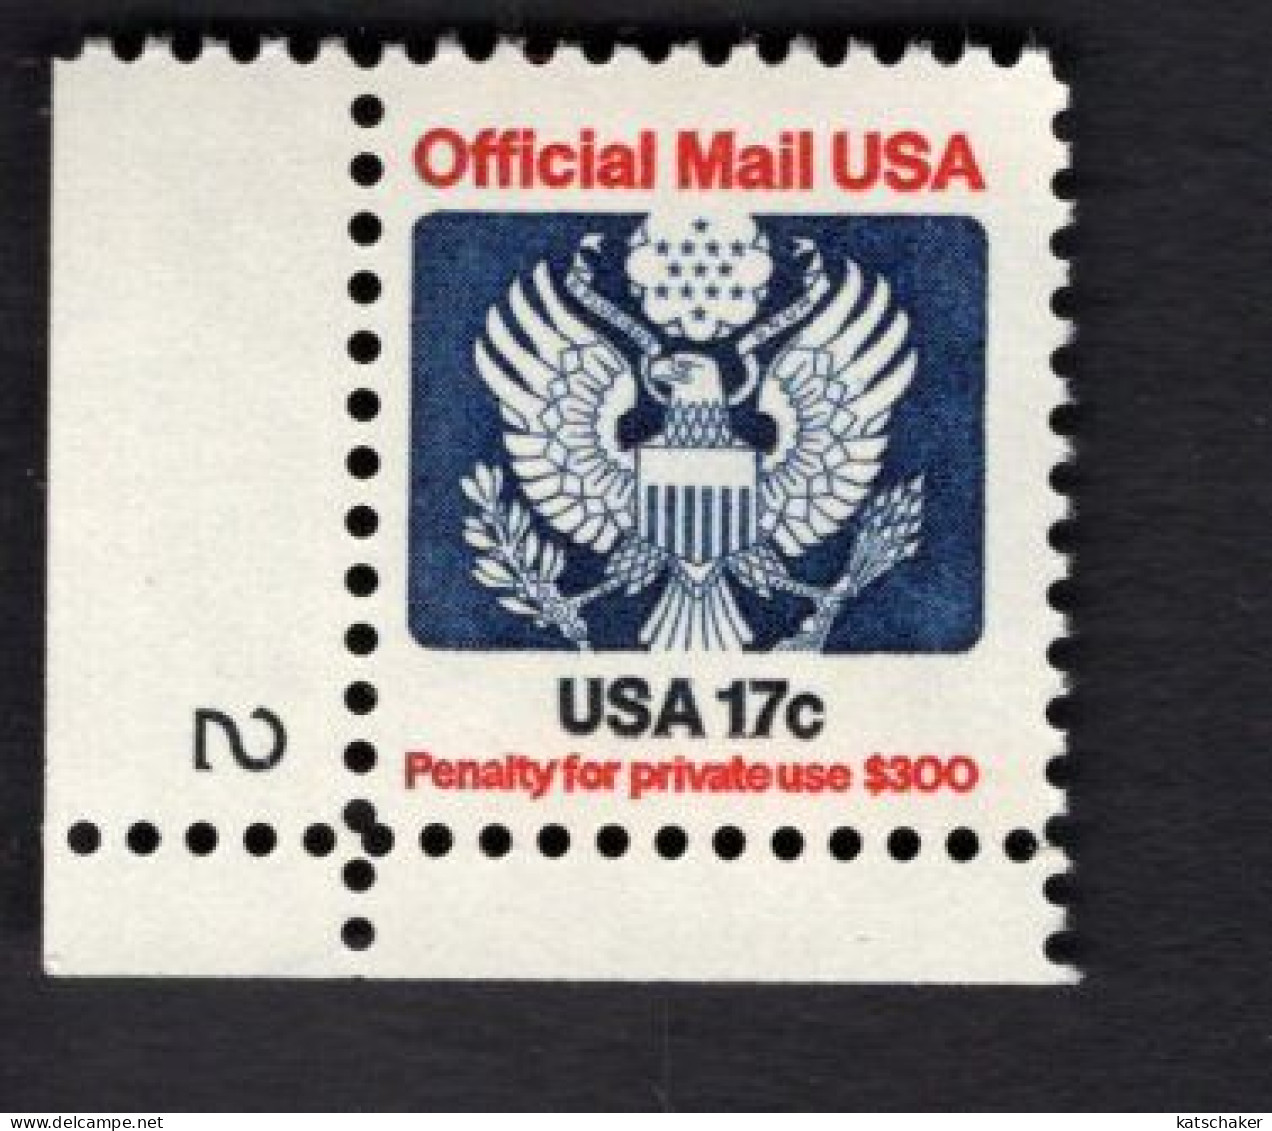 2008954892 1983 SCOTT O130 (XX)  POSTFRIS MINT NEVER HINGED - EAGLE AND SHIELD OFFICIAL MAIL - PLATE NUMBER 2 - Oficial